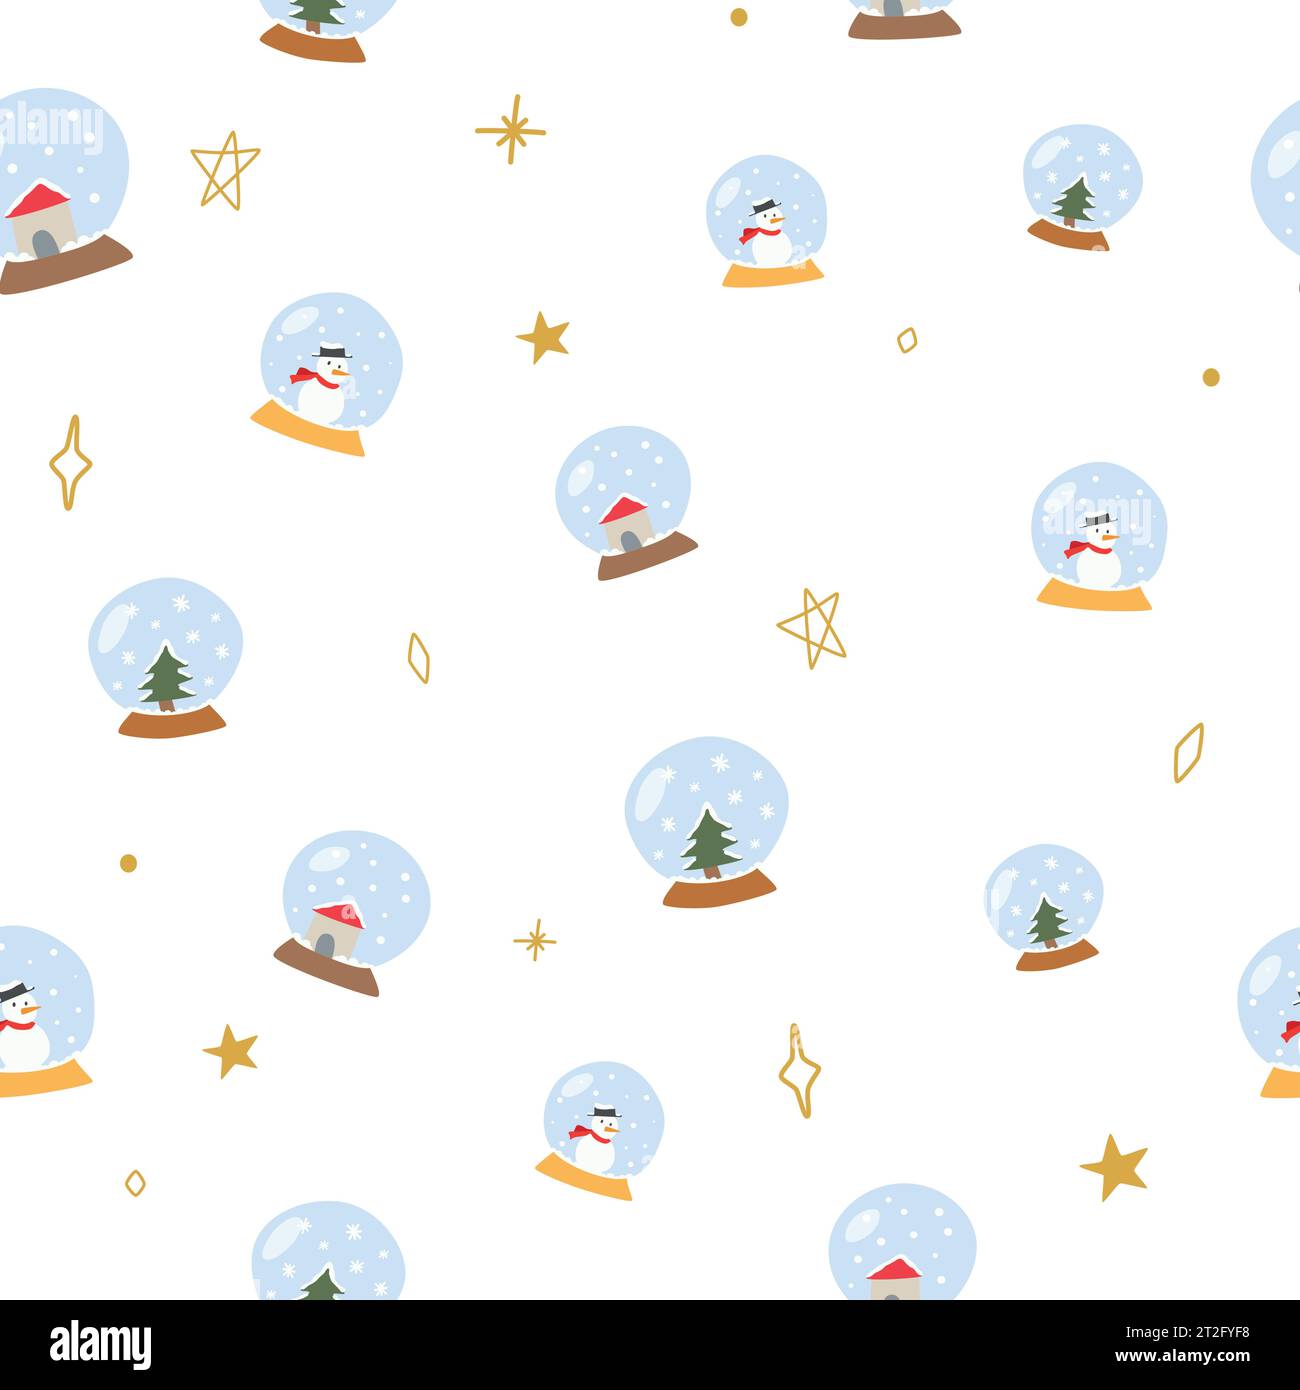 Christmas and winter themed seamless pattern, with snowballs and graphic elements on white background Stock Vector